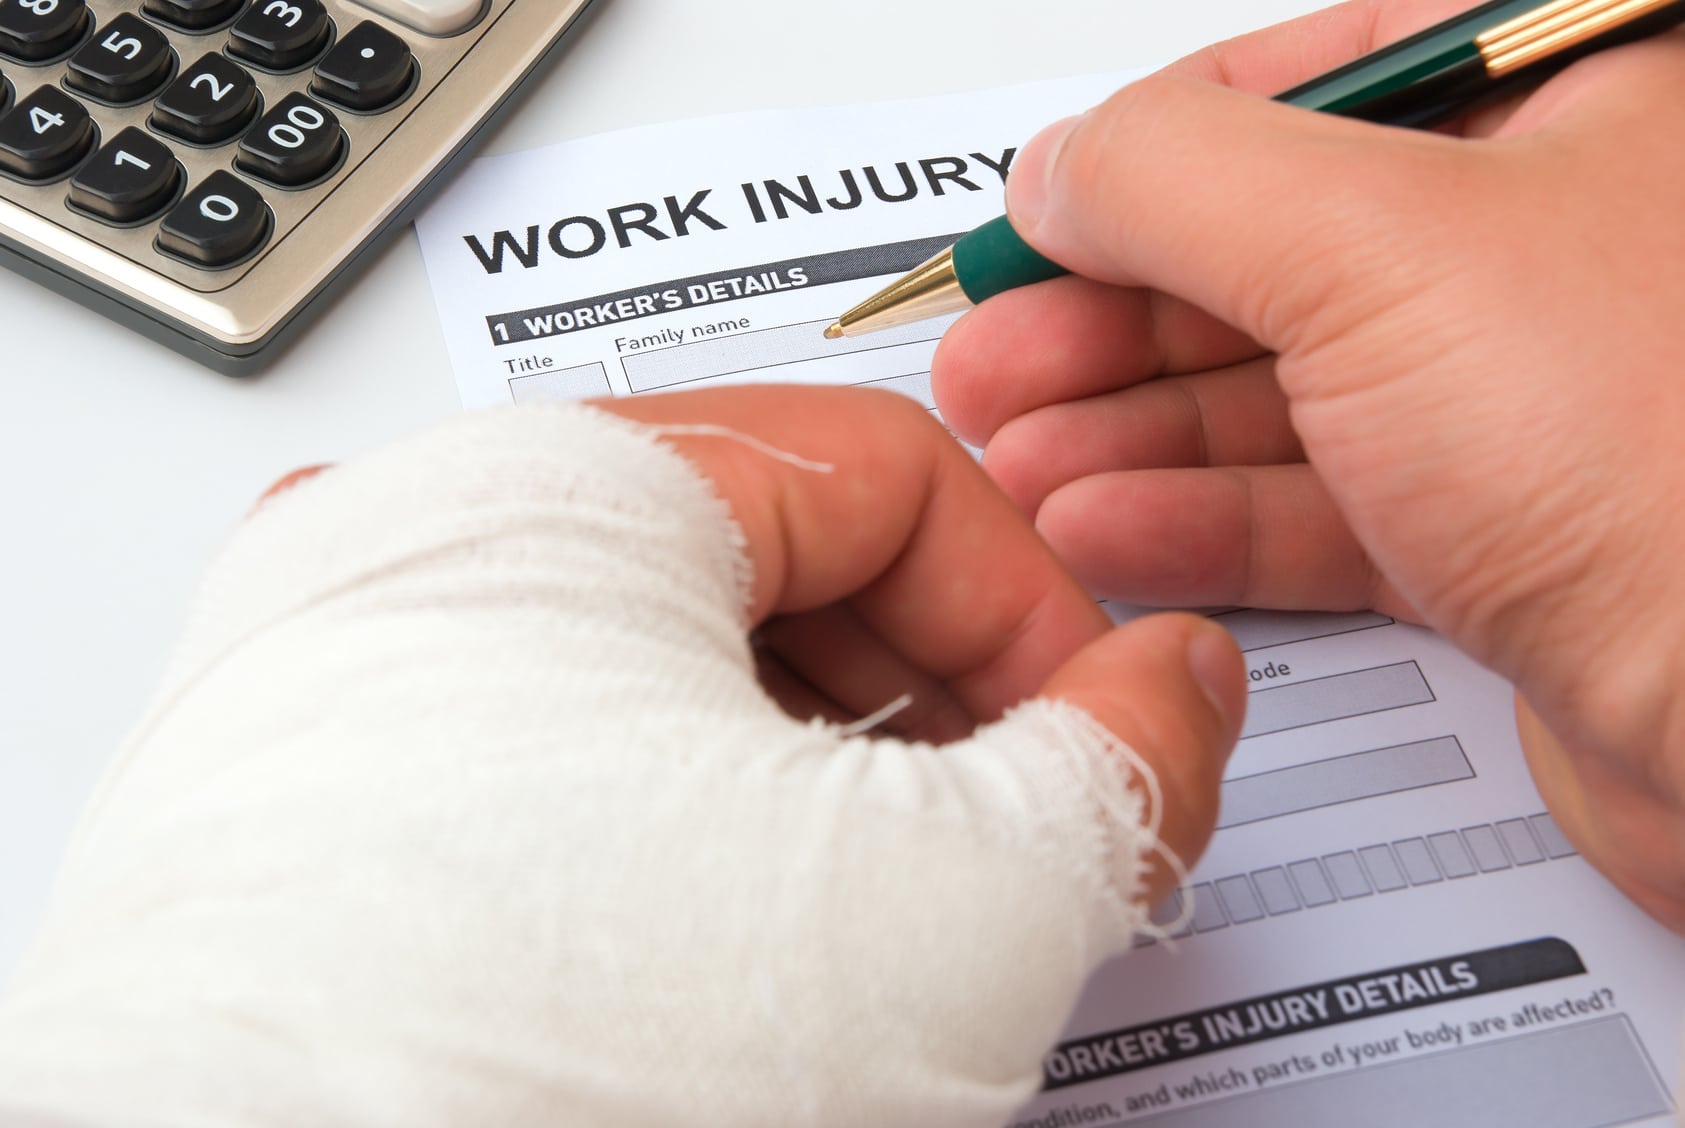 5 Workplace Safety Tips to Reduce Workers Compensation Claims